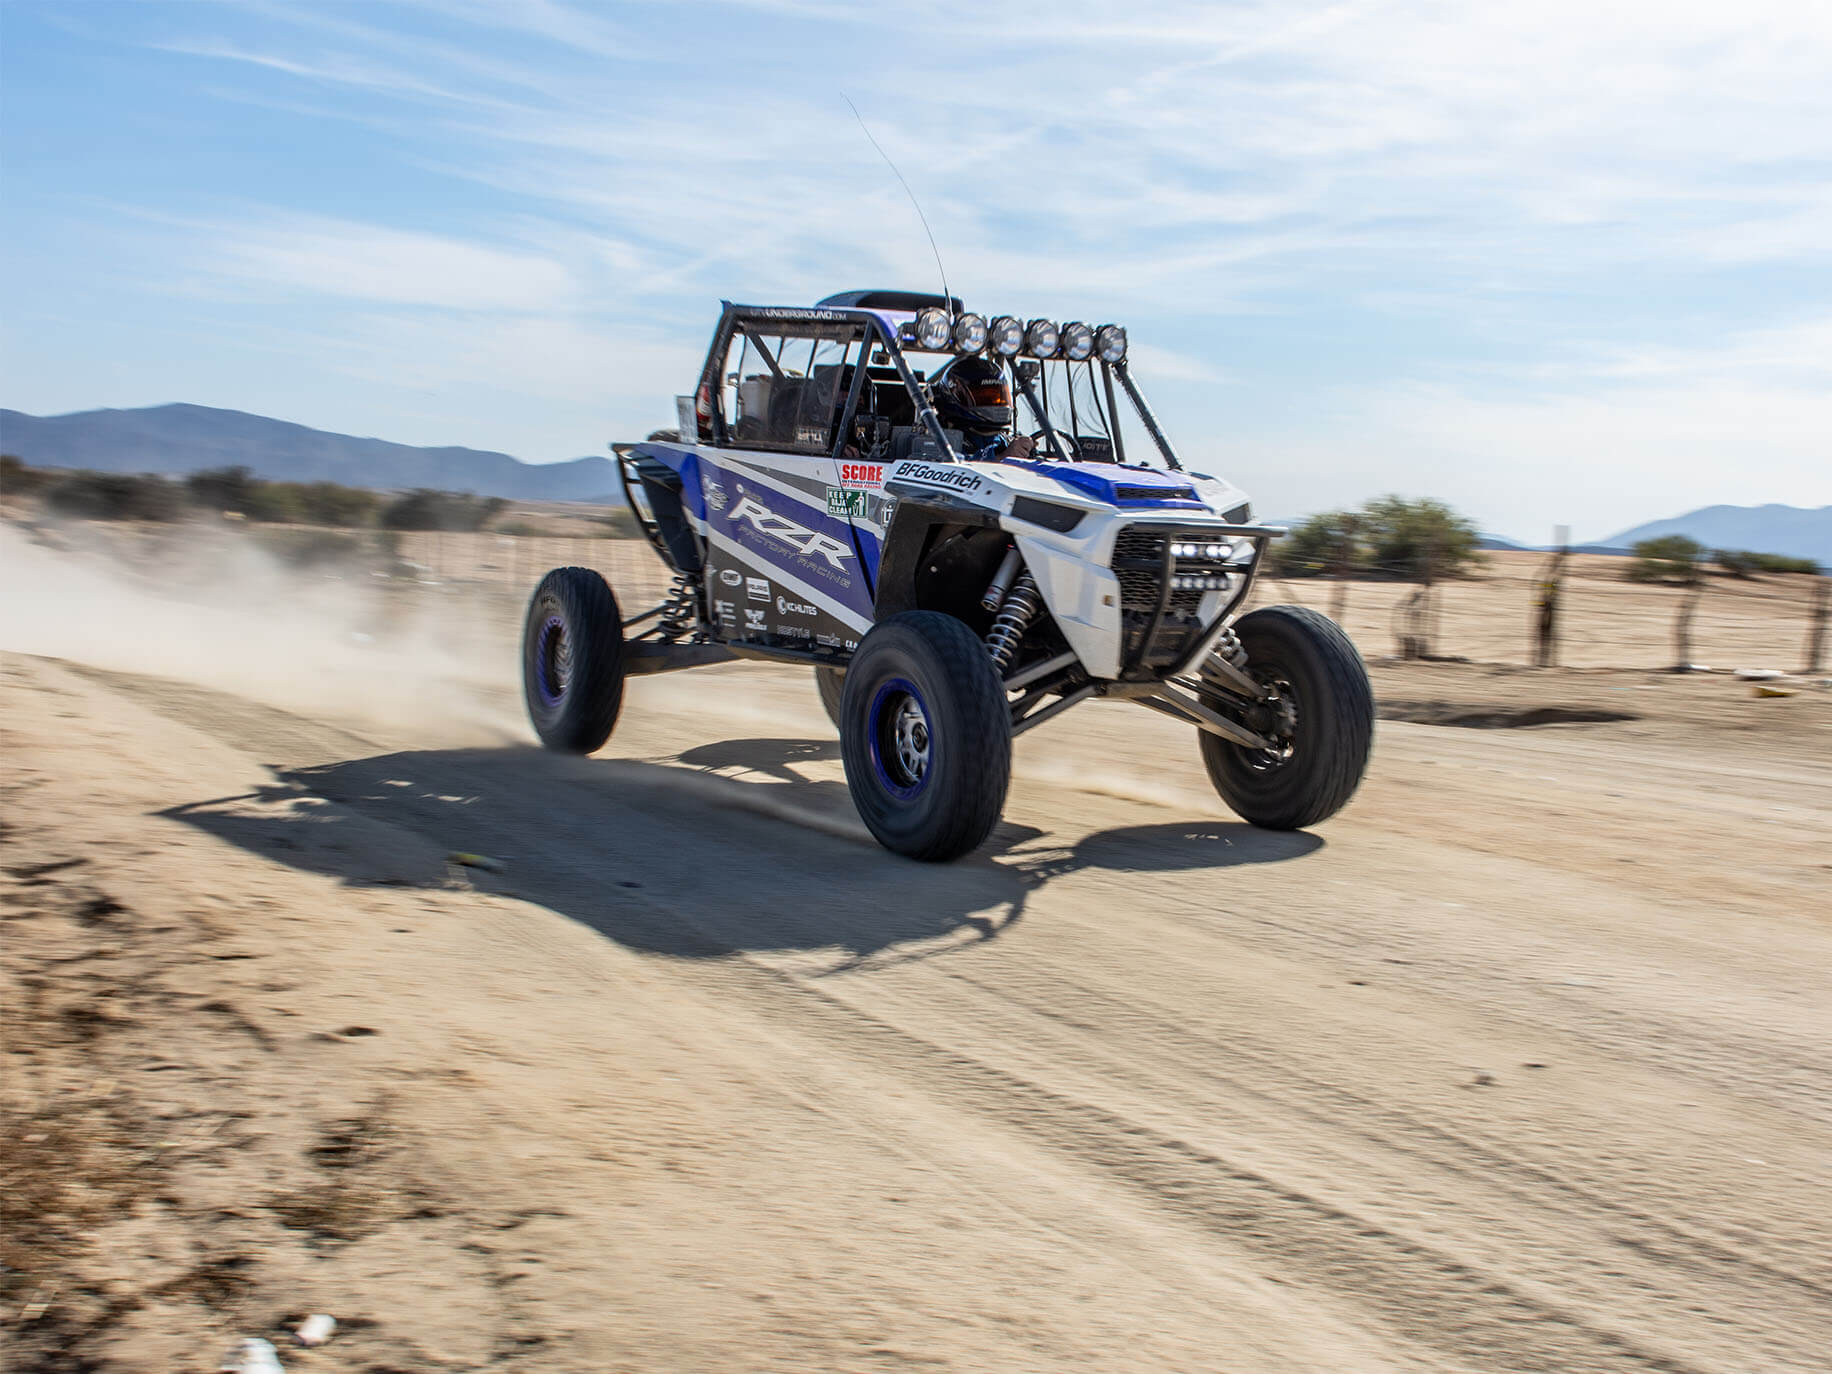 Jagged X Racing Team going full speed at the 2018 Baja 1000